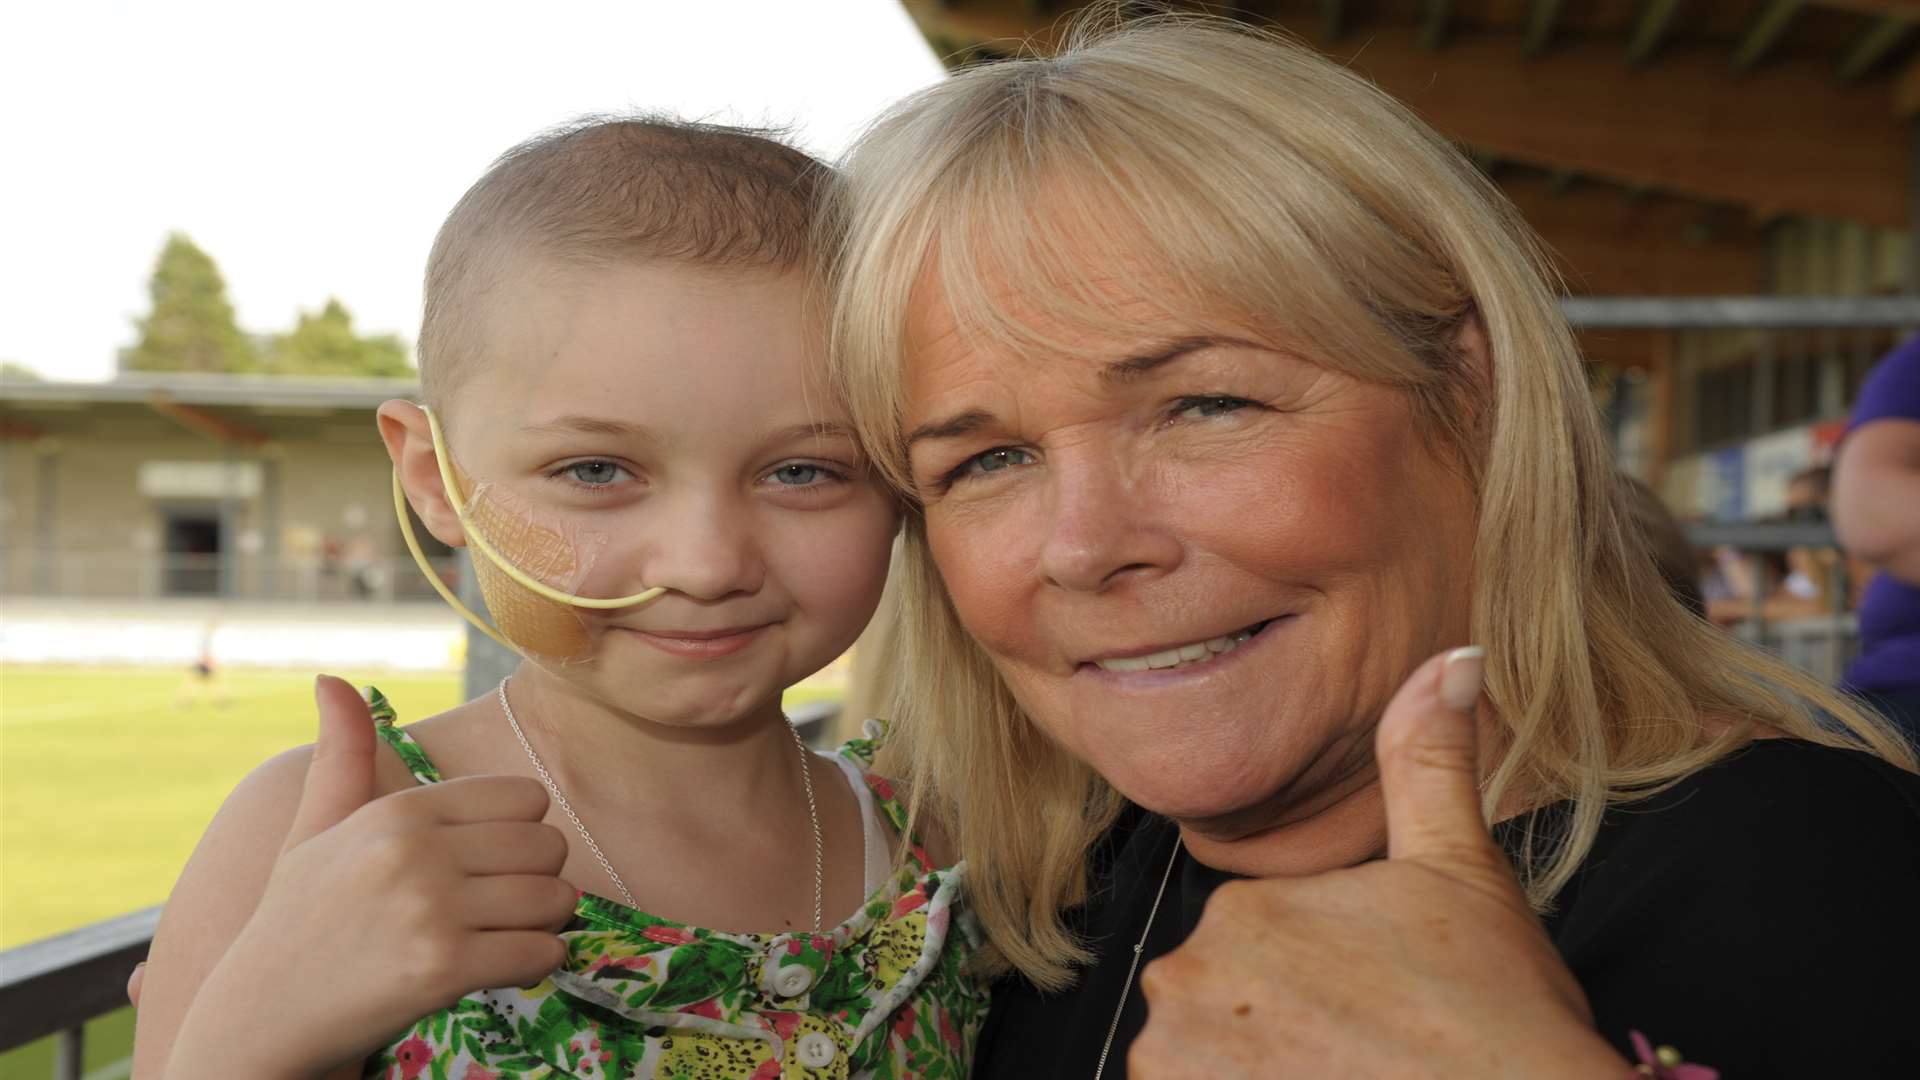 Linda is a patron for the Stacey Mowle appeal, who sadly passed away earlier this month.